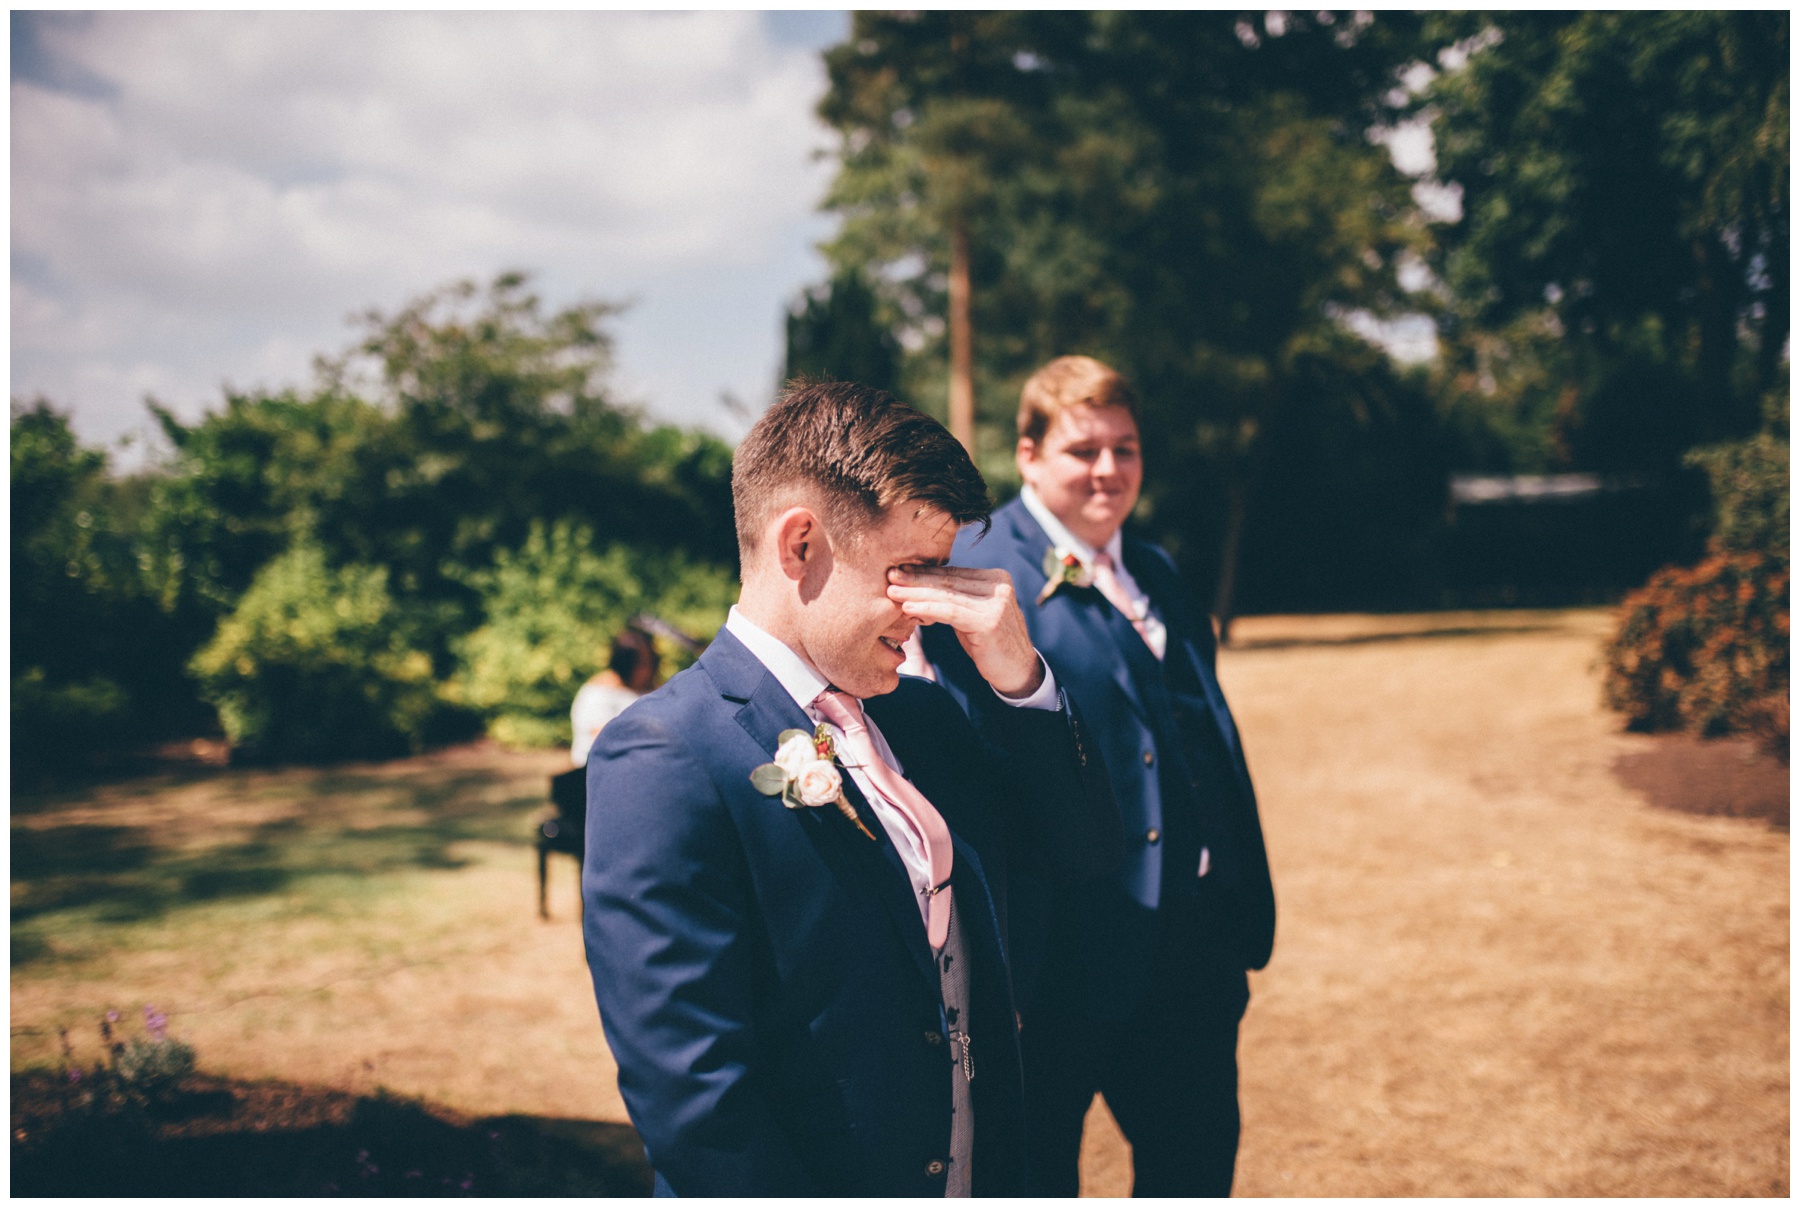 Groom tearing up at the top of the aisle in new Cheshire wedding venue, Tilstone House in Tarporley.